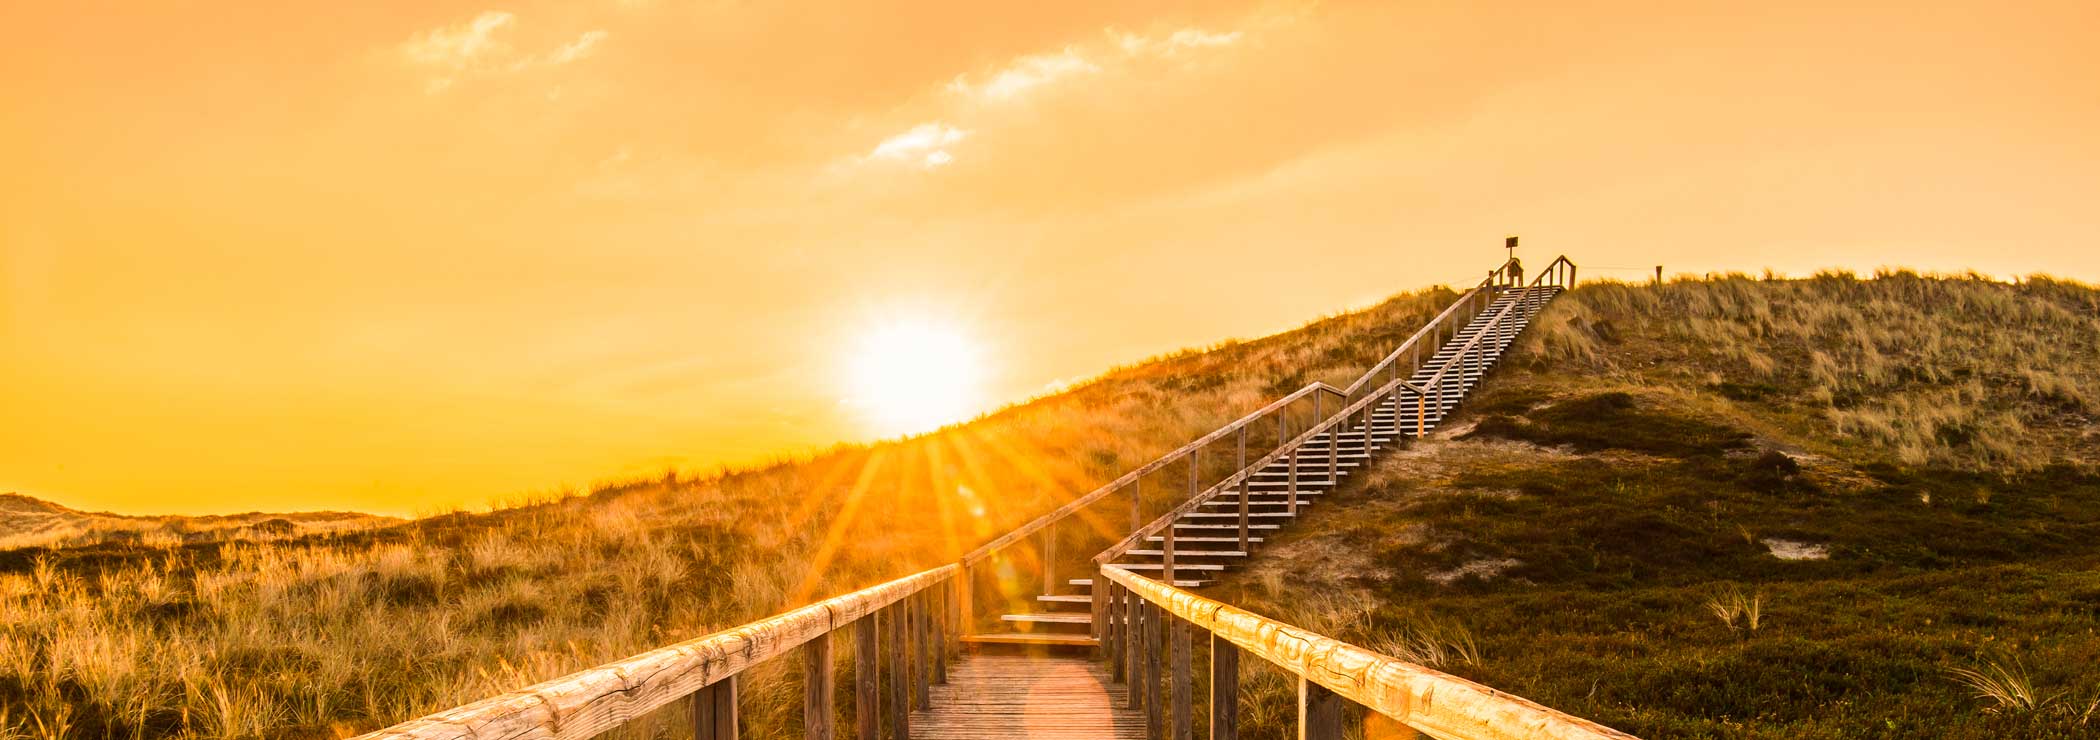 Stairs on the beach with sunset